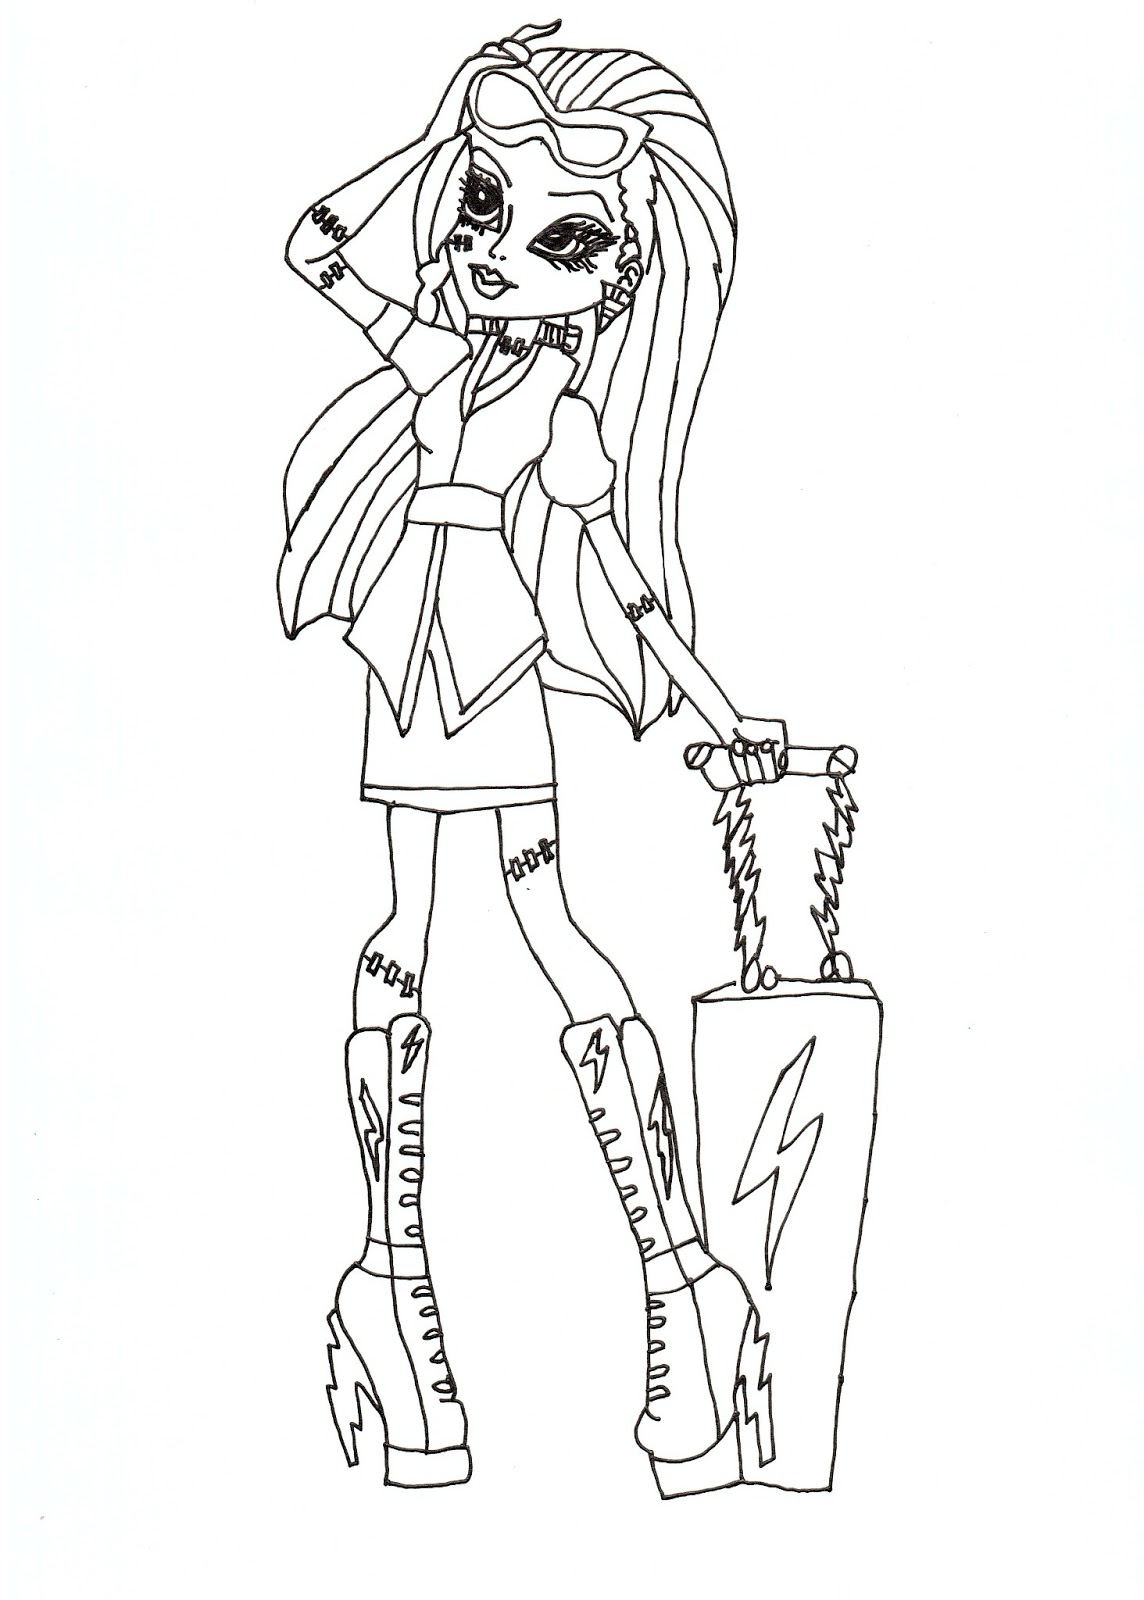 Download Free Printable Monster High Coloring Pages: Frankie Stein Scaris Coloring Sheet